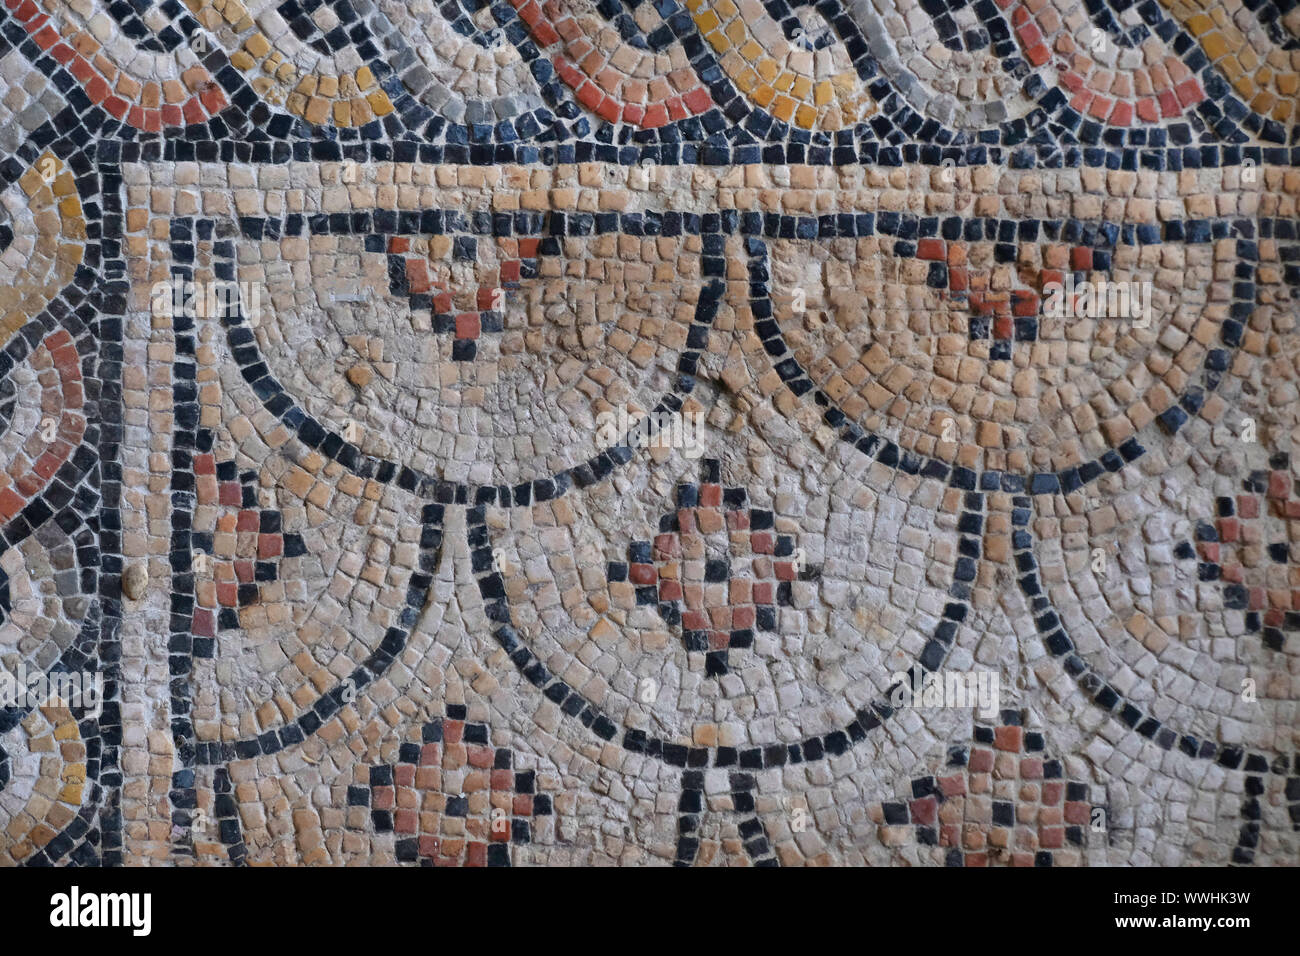 Floor mosaic dating back to the 4th century at the Church of the Nativity, or Basilica of the Nativity, traditionally believed by Christians to be the birthplace of Jesus Christ in the West Bank town of Bethlehem in the Autonomous Palestinian Authority Stock Photo